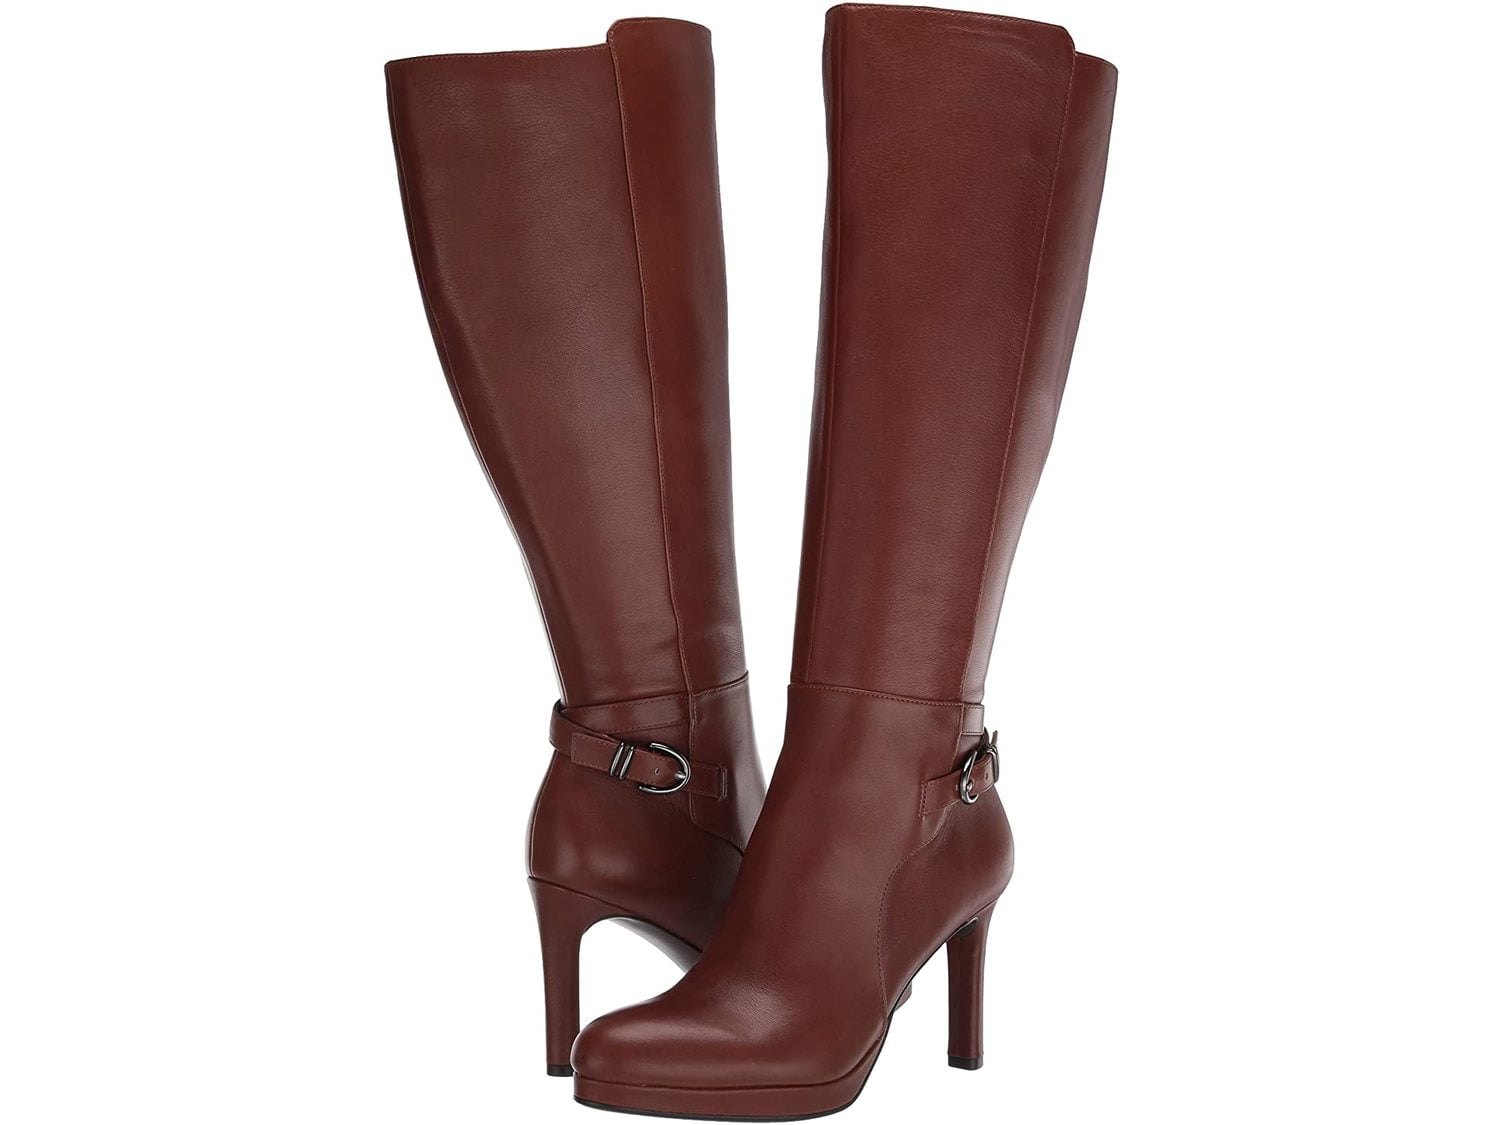 New Naturalizer June Knee High Riding Boot Buckle Strap Cinnamon Brown Size 6.5